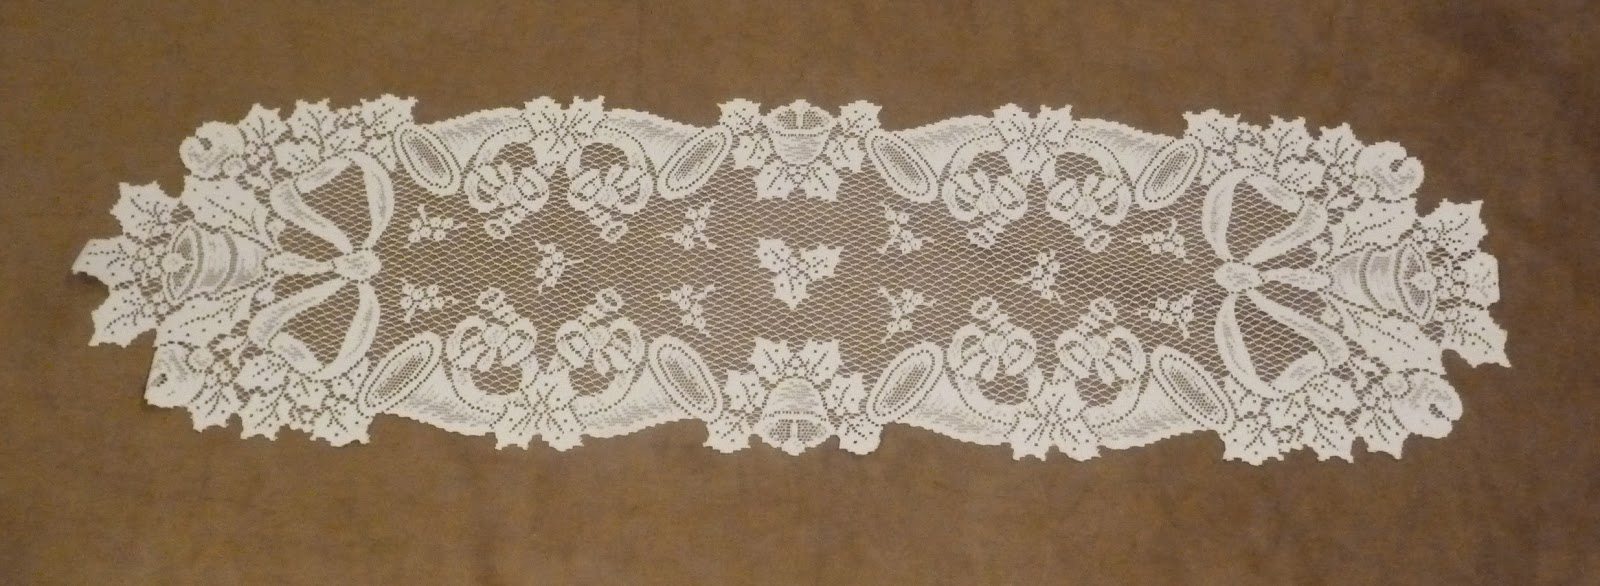 http://www.ebay.com/itm/Christmas-Holiday-Table-Runner-Heritage-Lace-White-14-x-70-NWOT-/151245447325